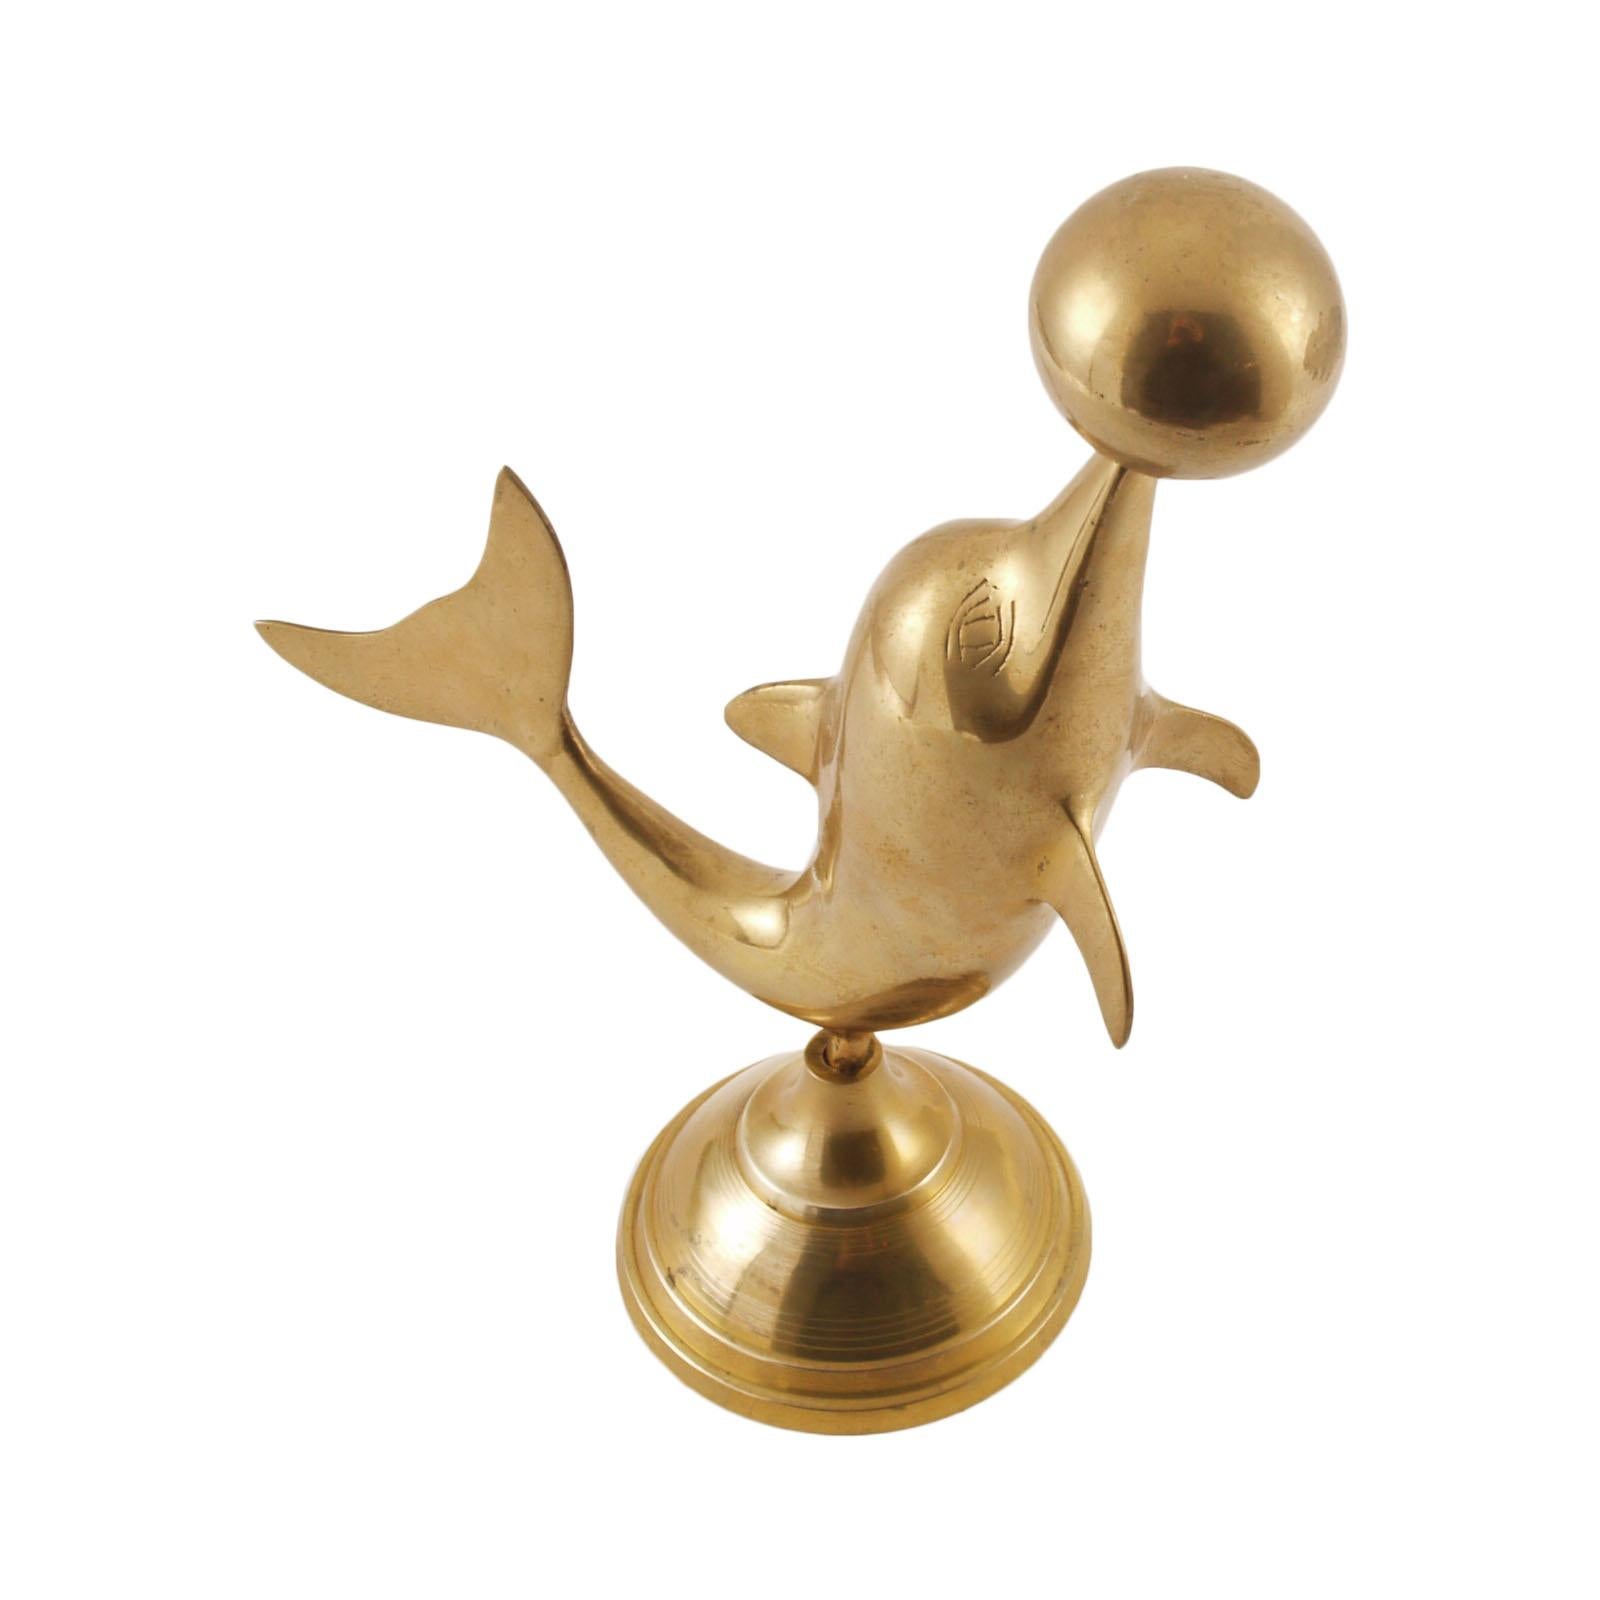 Italian Mid-Century Modern 1930s Art Deco Dolphin Statue in Gilded Brass For Sale